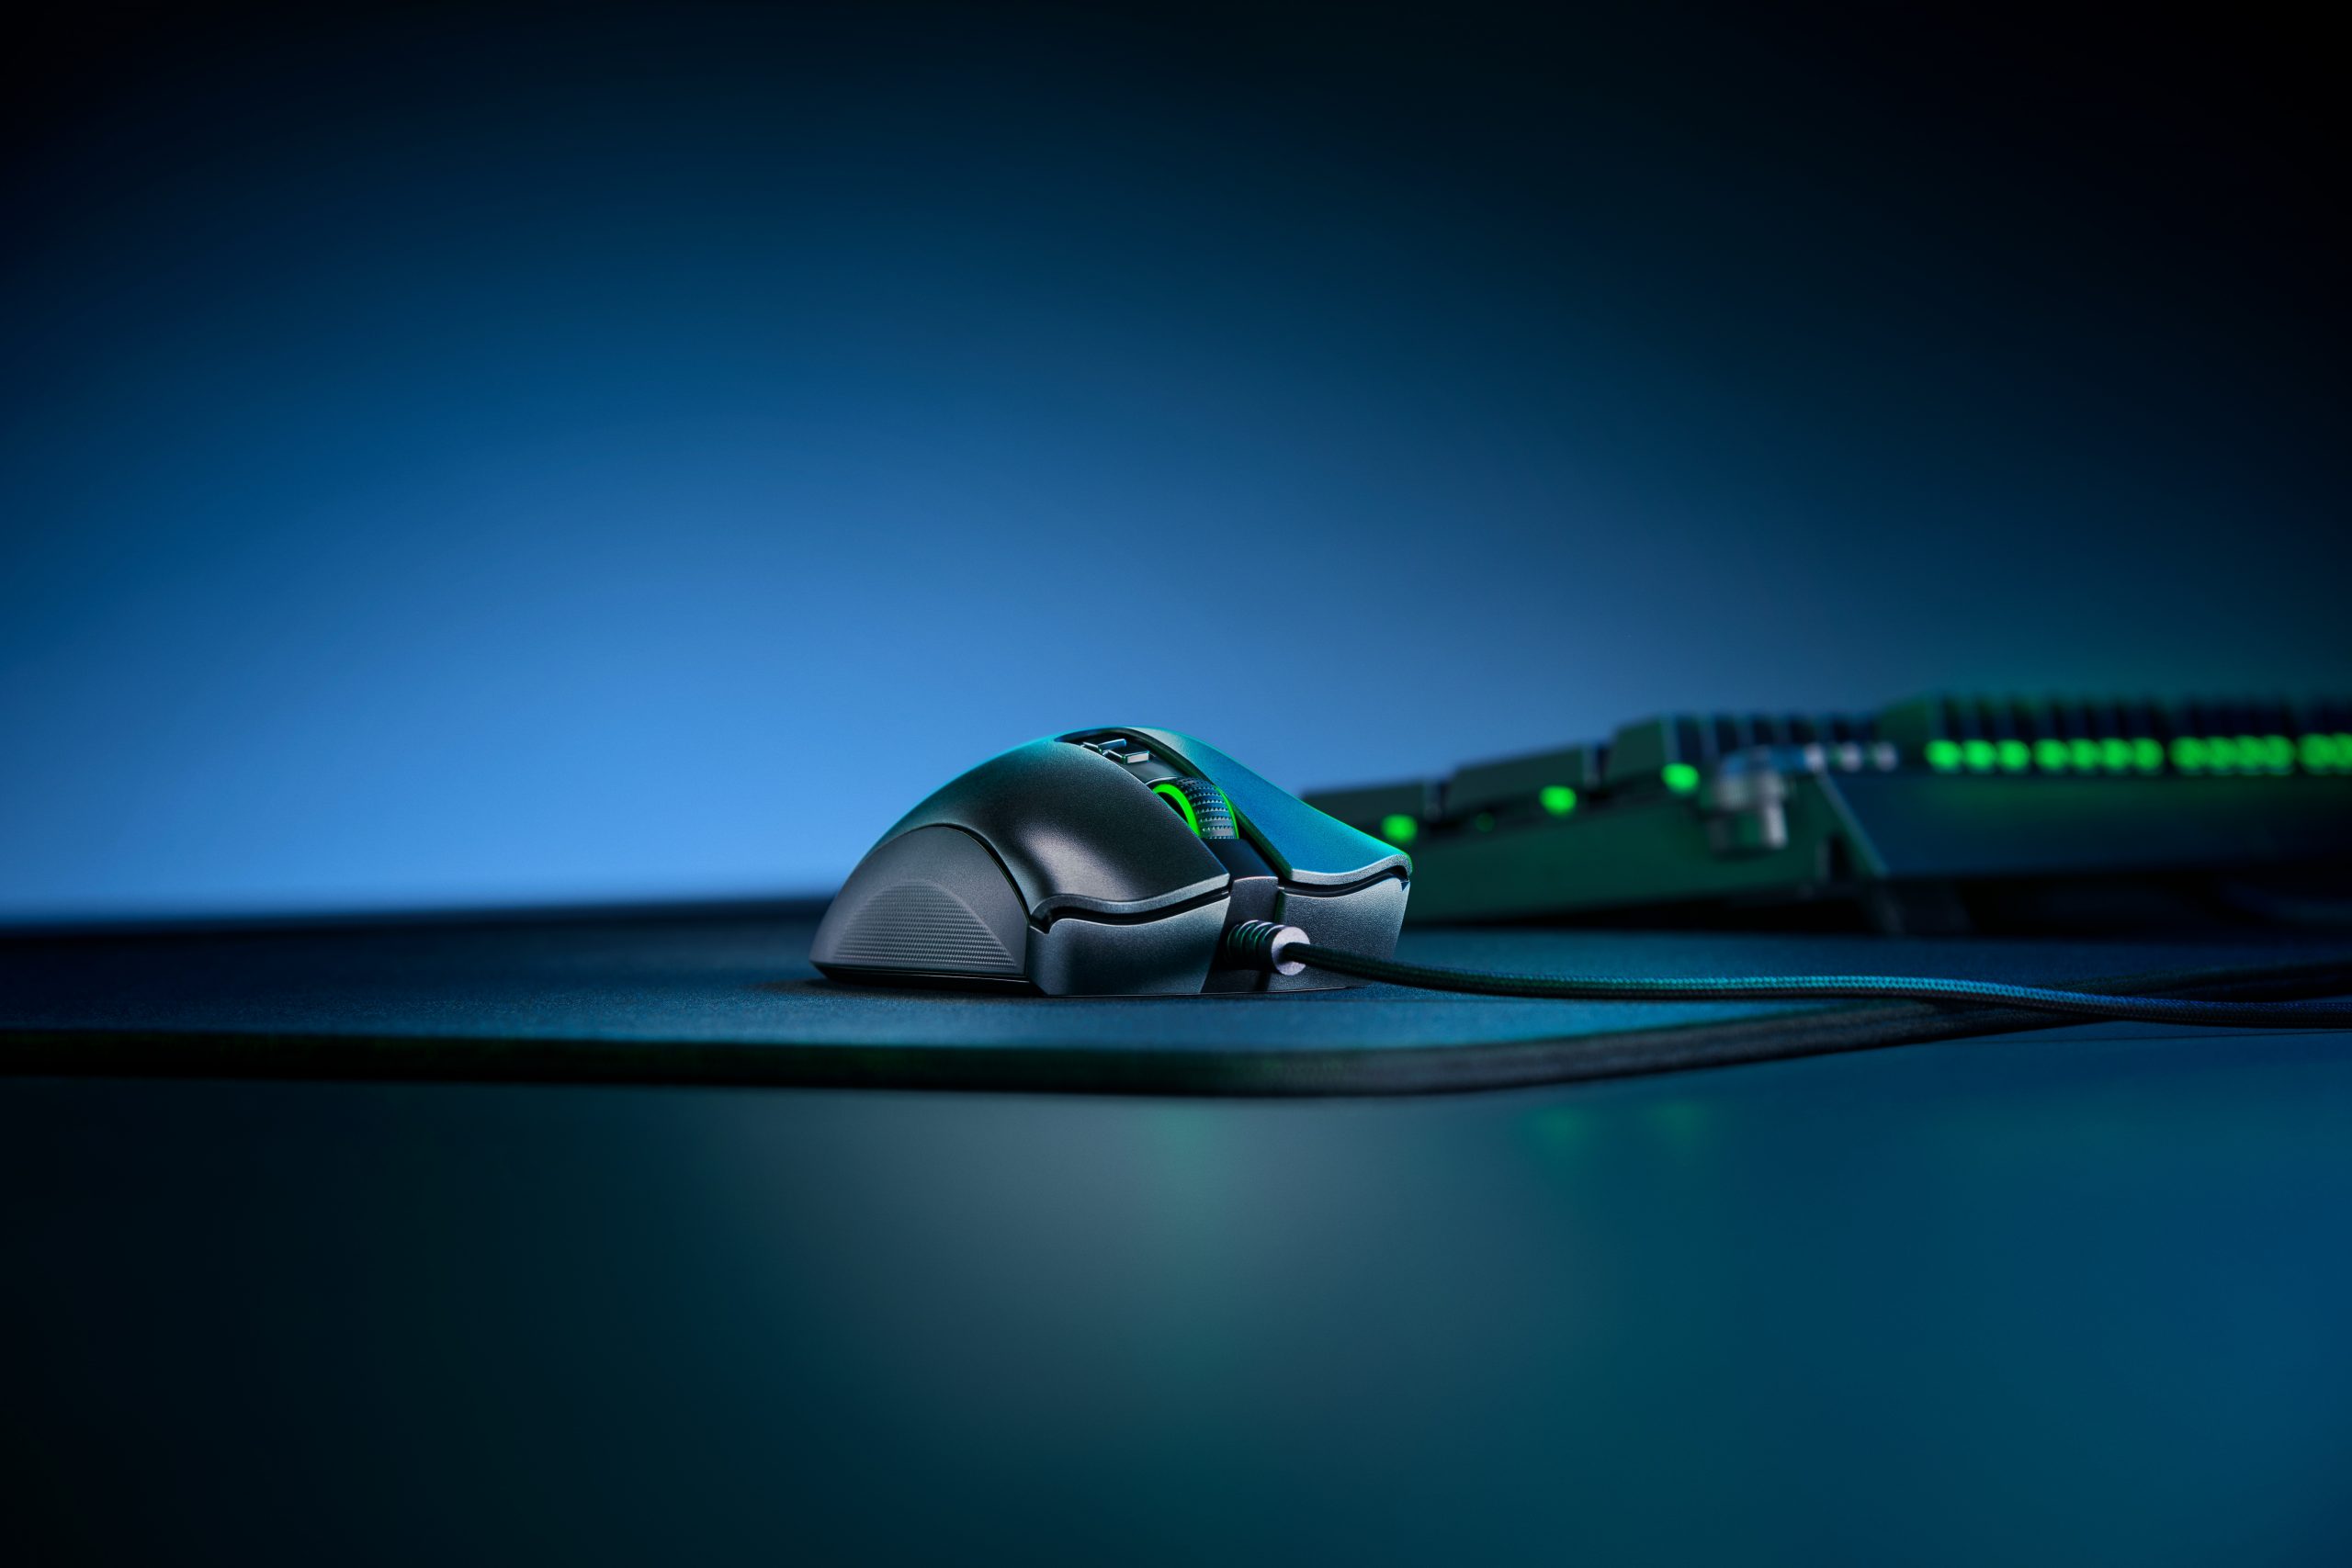 How great gaming peripherals can give you a competitive edge